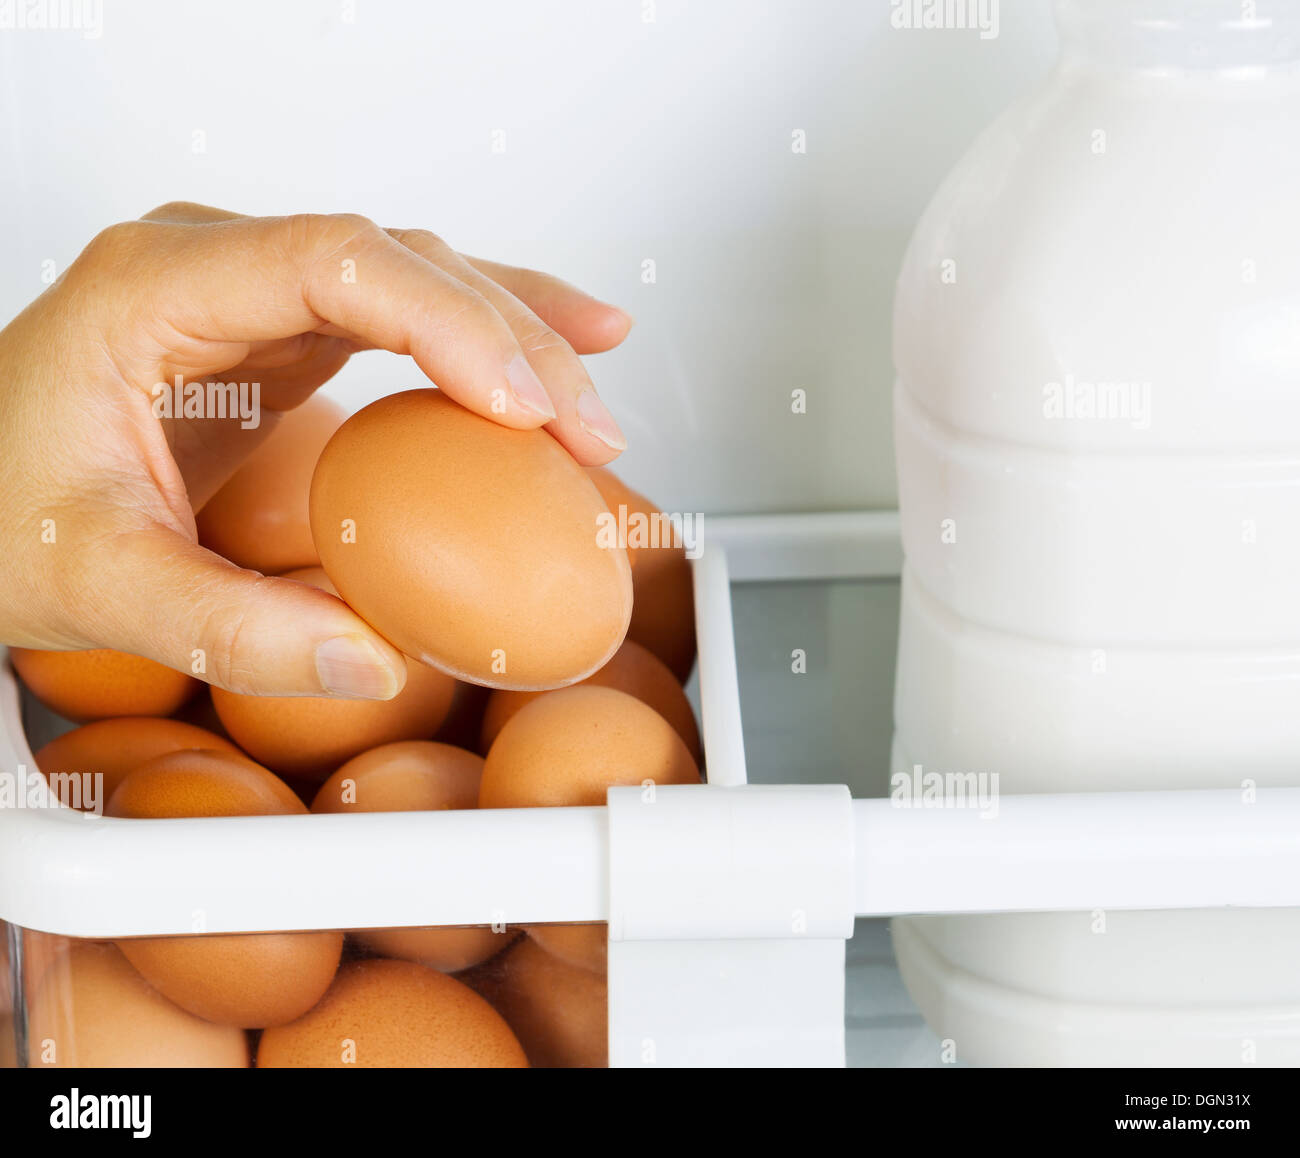 Photo of female hand selecting fresh brown organic egg with partial milk container on inside of refrigerator door shelf Stock Photo